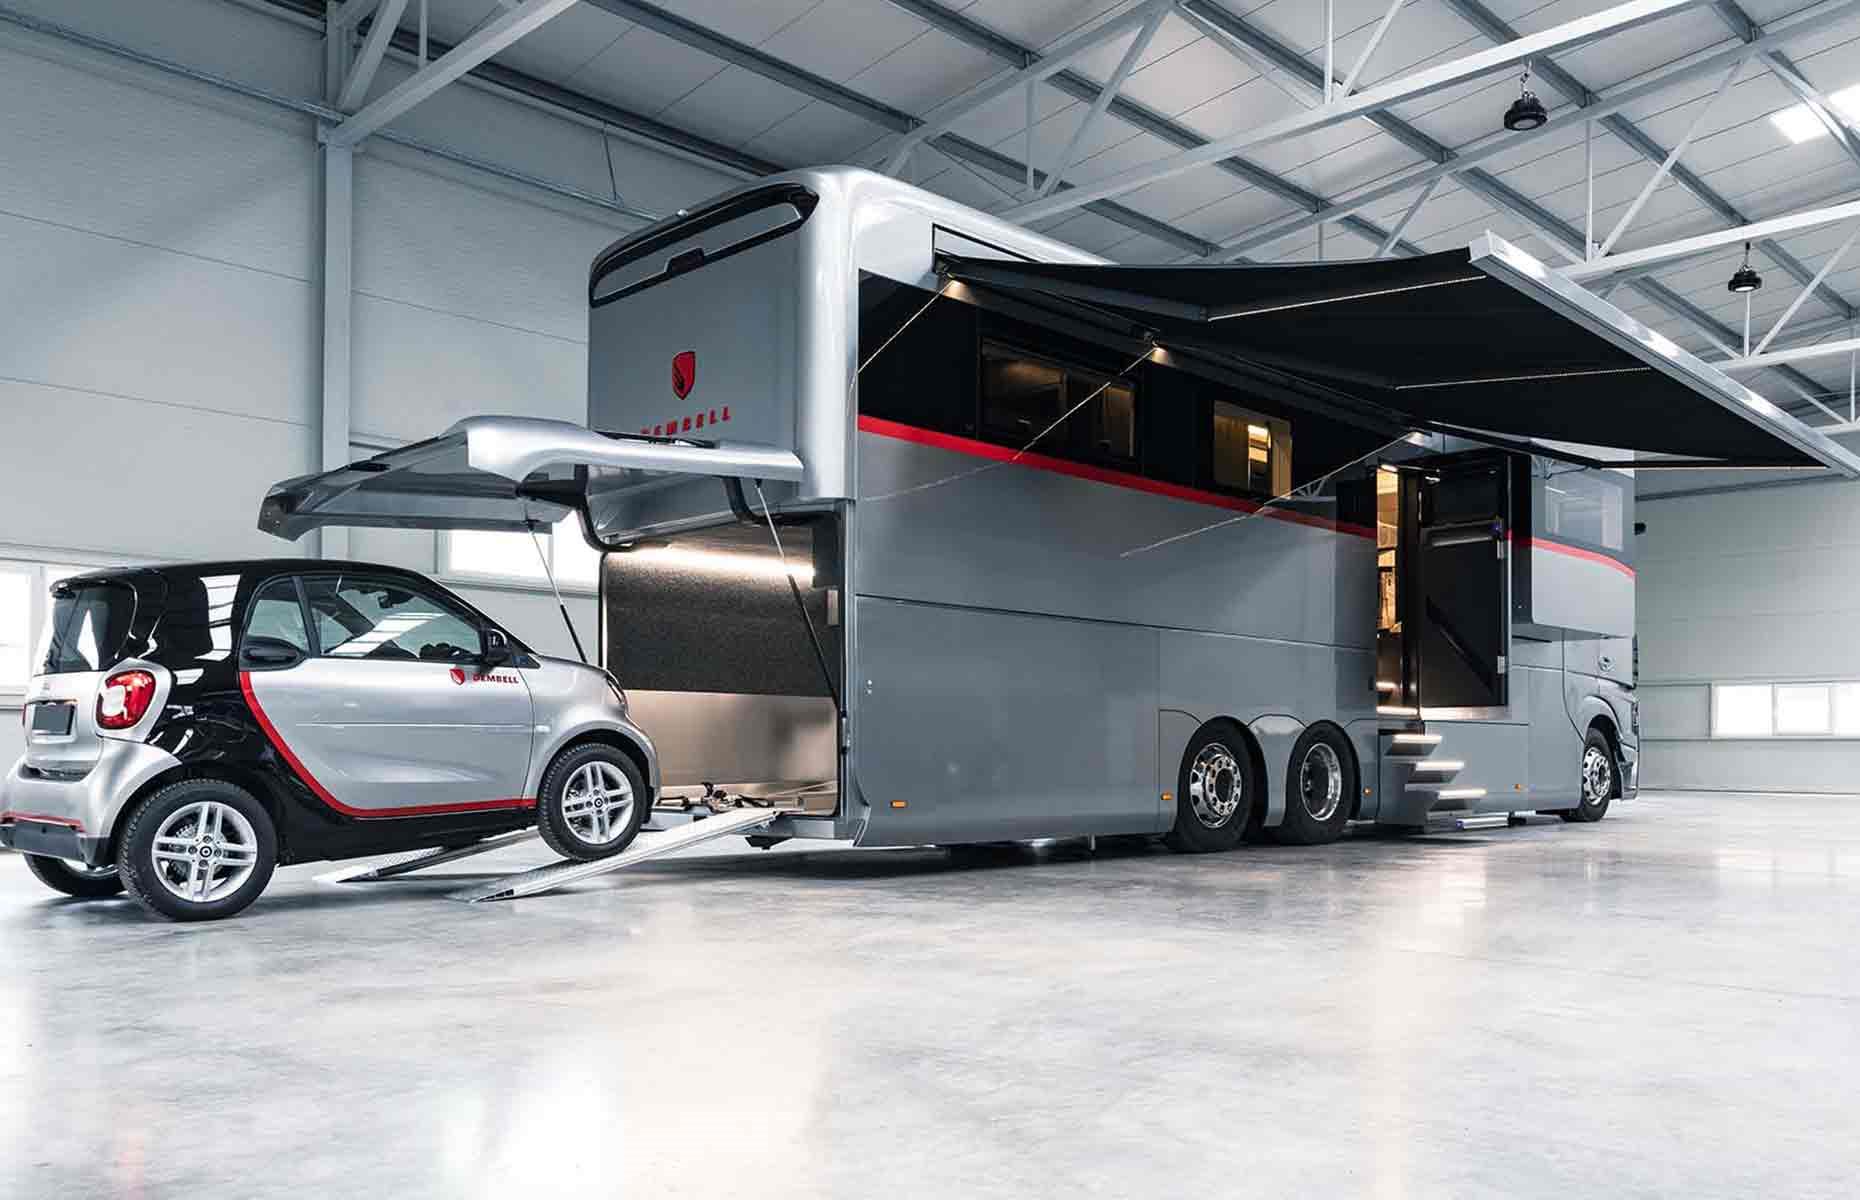 <p>According to Dembell, the motorhome's power uptake is similar to that of a detached house. To support its energy needs, the RV's smart electrical system includes six 330-watt solar panels mounted to the roof. </p>  <p>Most remarkably of all, however, is the large garage nestled in the underbelly. The cavernous space can accommodate a car of up to 13 feet long, and it's also fitted out with hydraulic tracks that can draw parked vehicles up into the storage compartment. A hydraulic lift can adjust the ceiling height for taller cars, while ensuring the bedroom above the garage remains functional. </p>